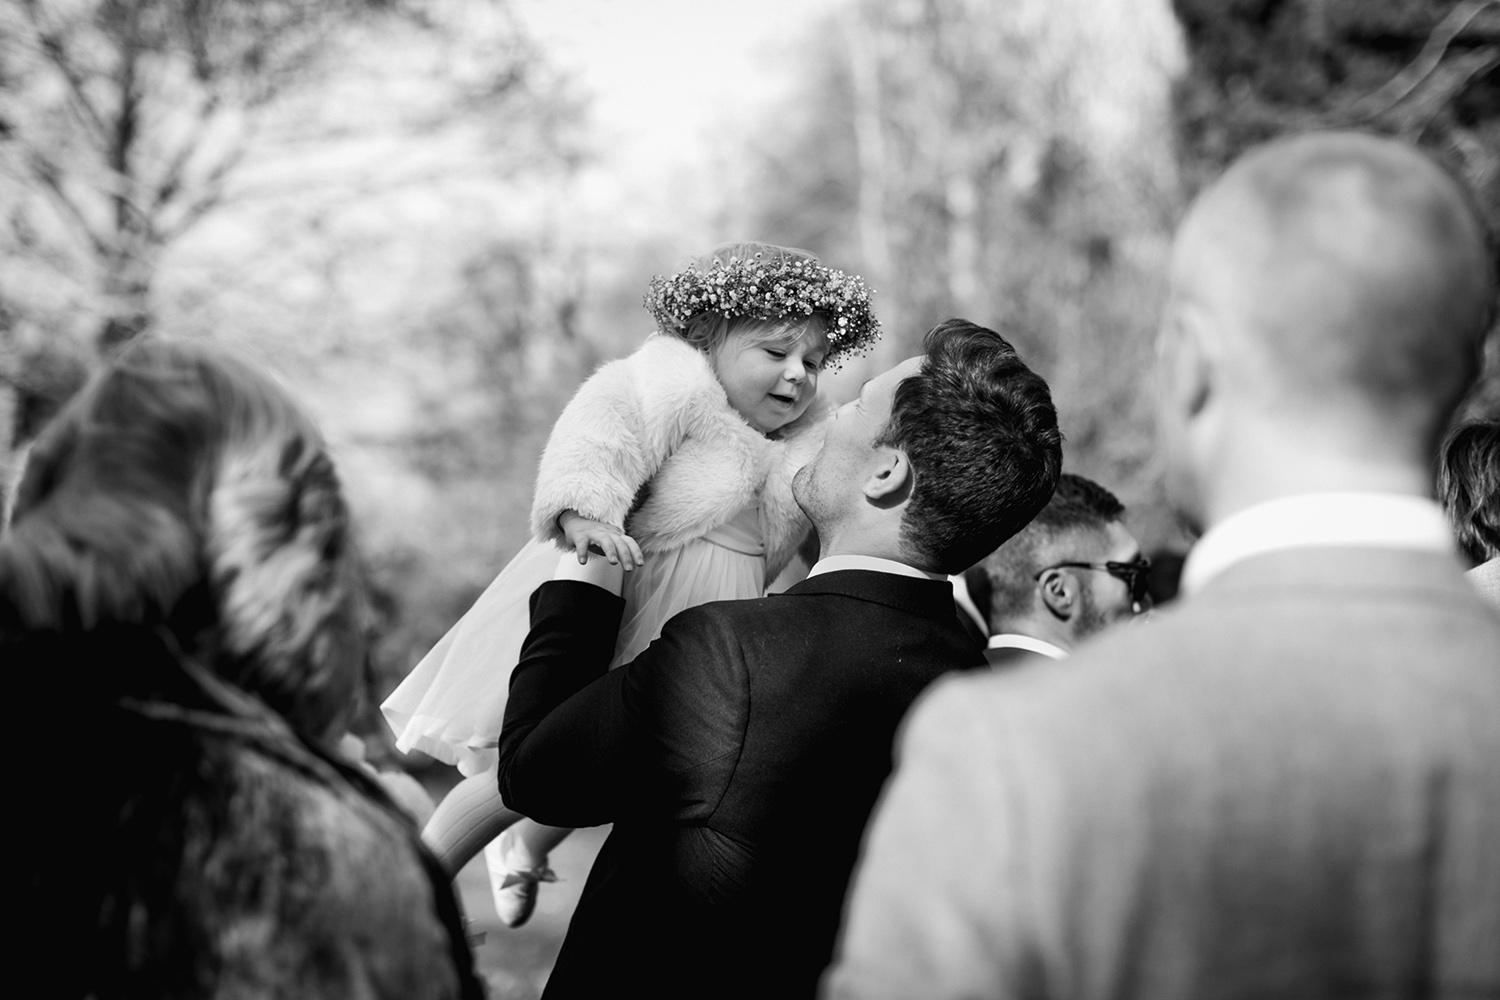 flower girl with flower crown being lifted into the air by groom